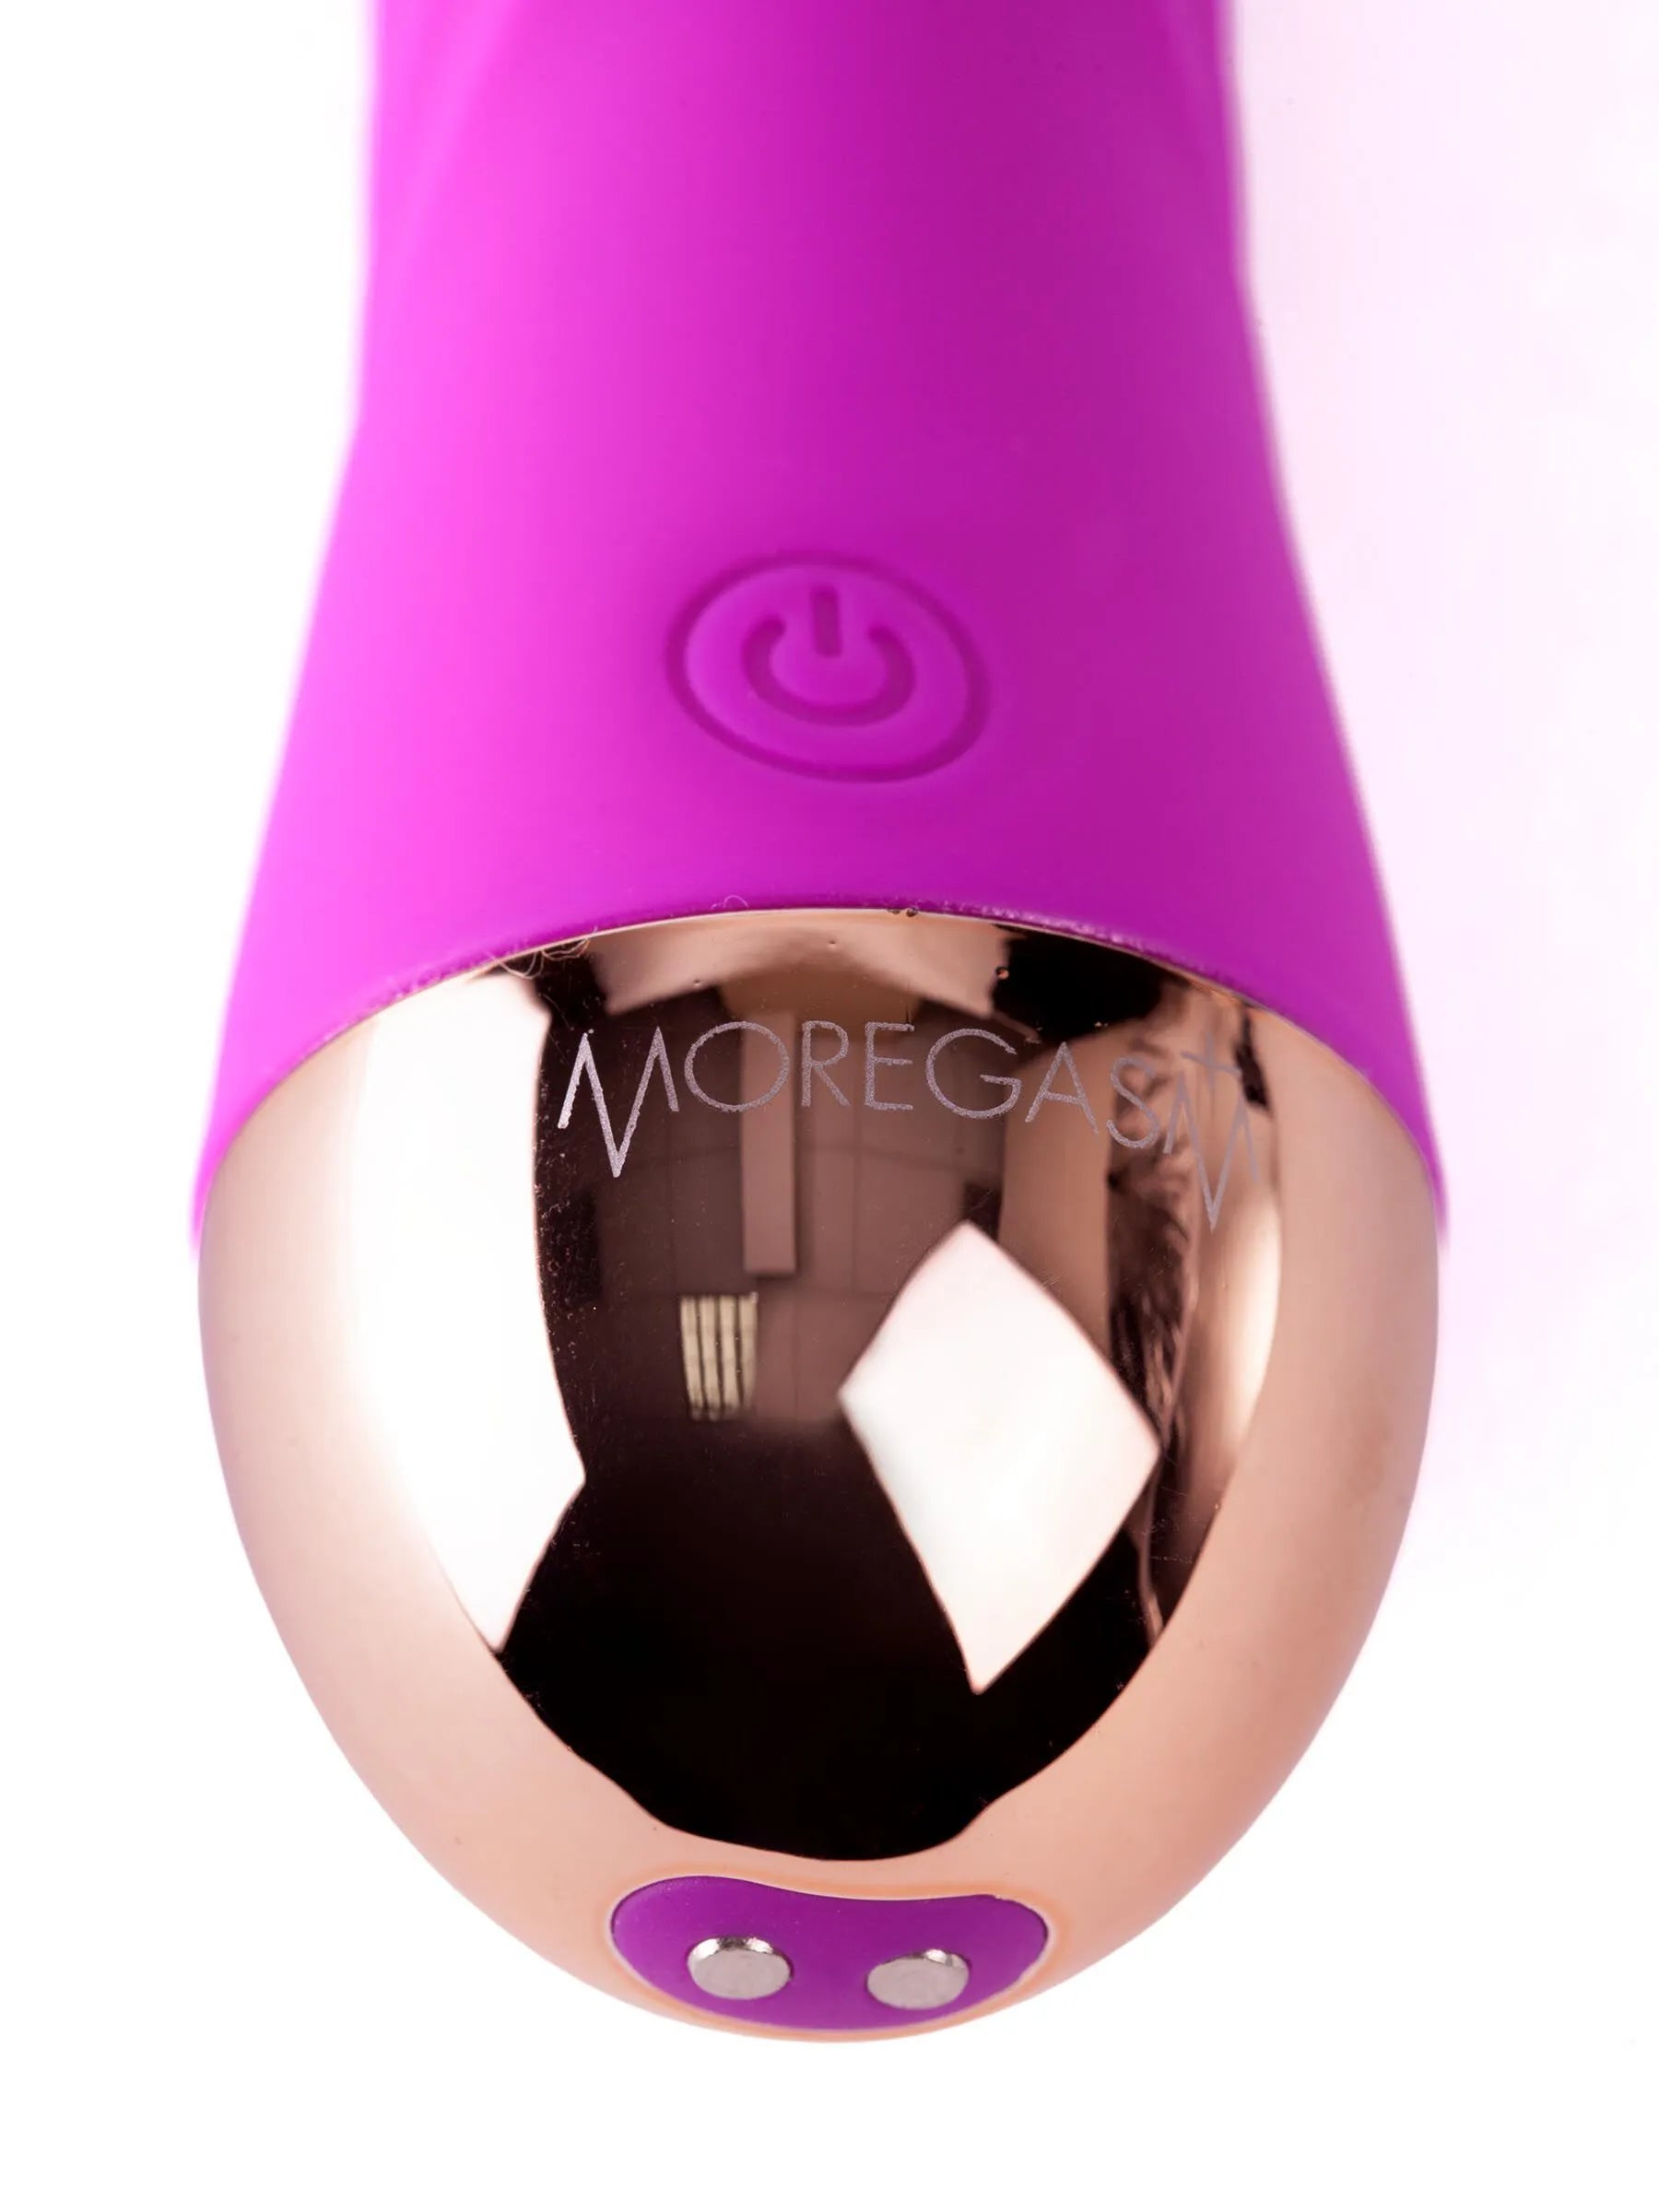 Moregasm Plus Bullet From Ann Summers, Image 01